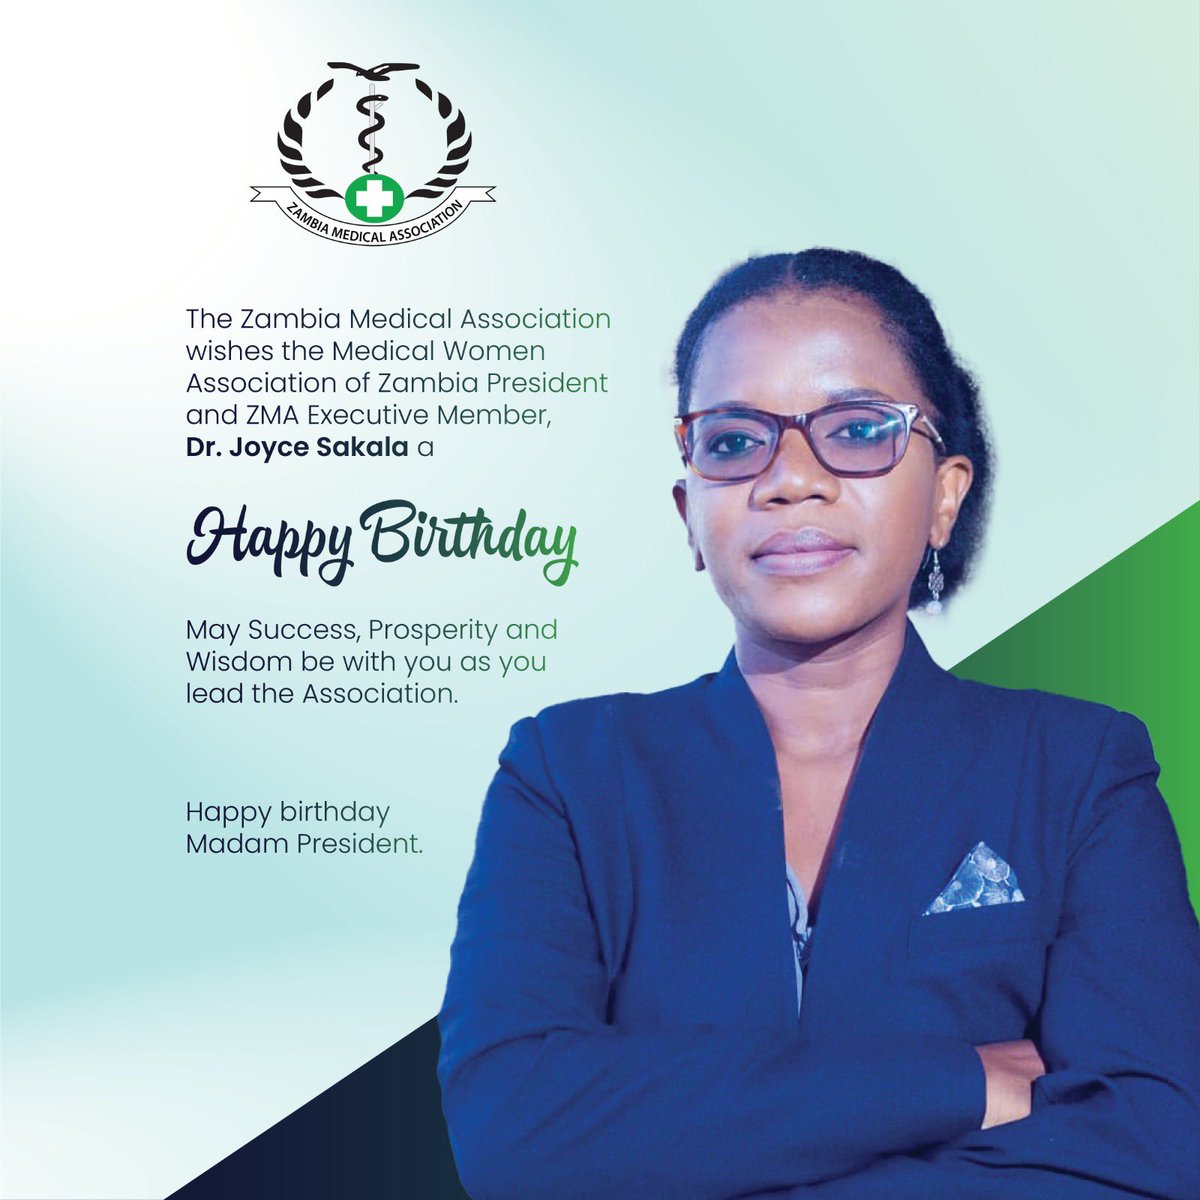 The Zambia Medical Association wishes the Medical Women Association of Zambia President and ZMA Executive Member, Dr. Joyce Sakala a Happy Birthday. May Success, Prosperity and Wisdom be with you as you lead the Association. Happy birthday Madam President.